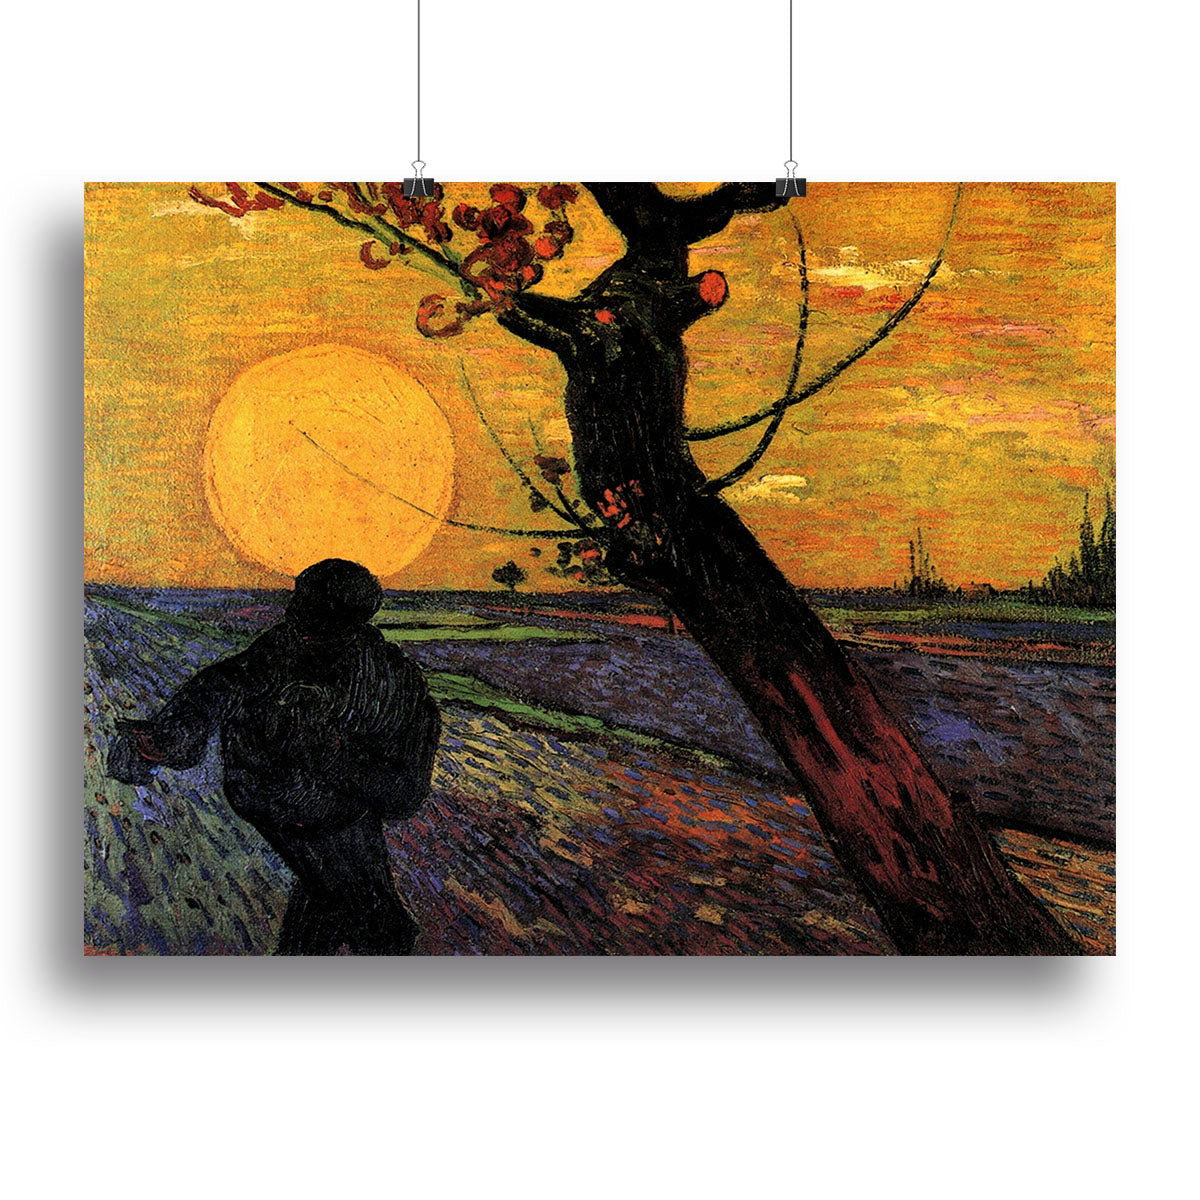 The Sower 2 by Van Gogh Canvas Print or Poster - Canvas Art Rocks - 2